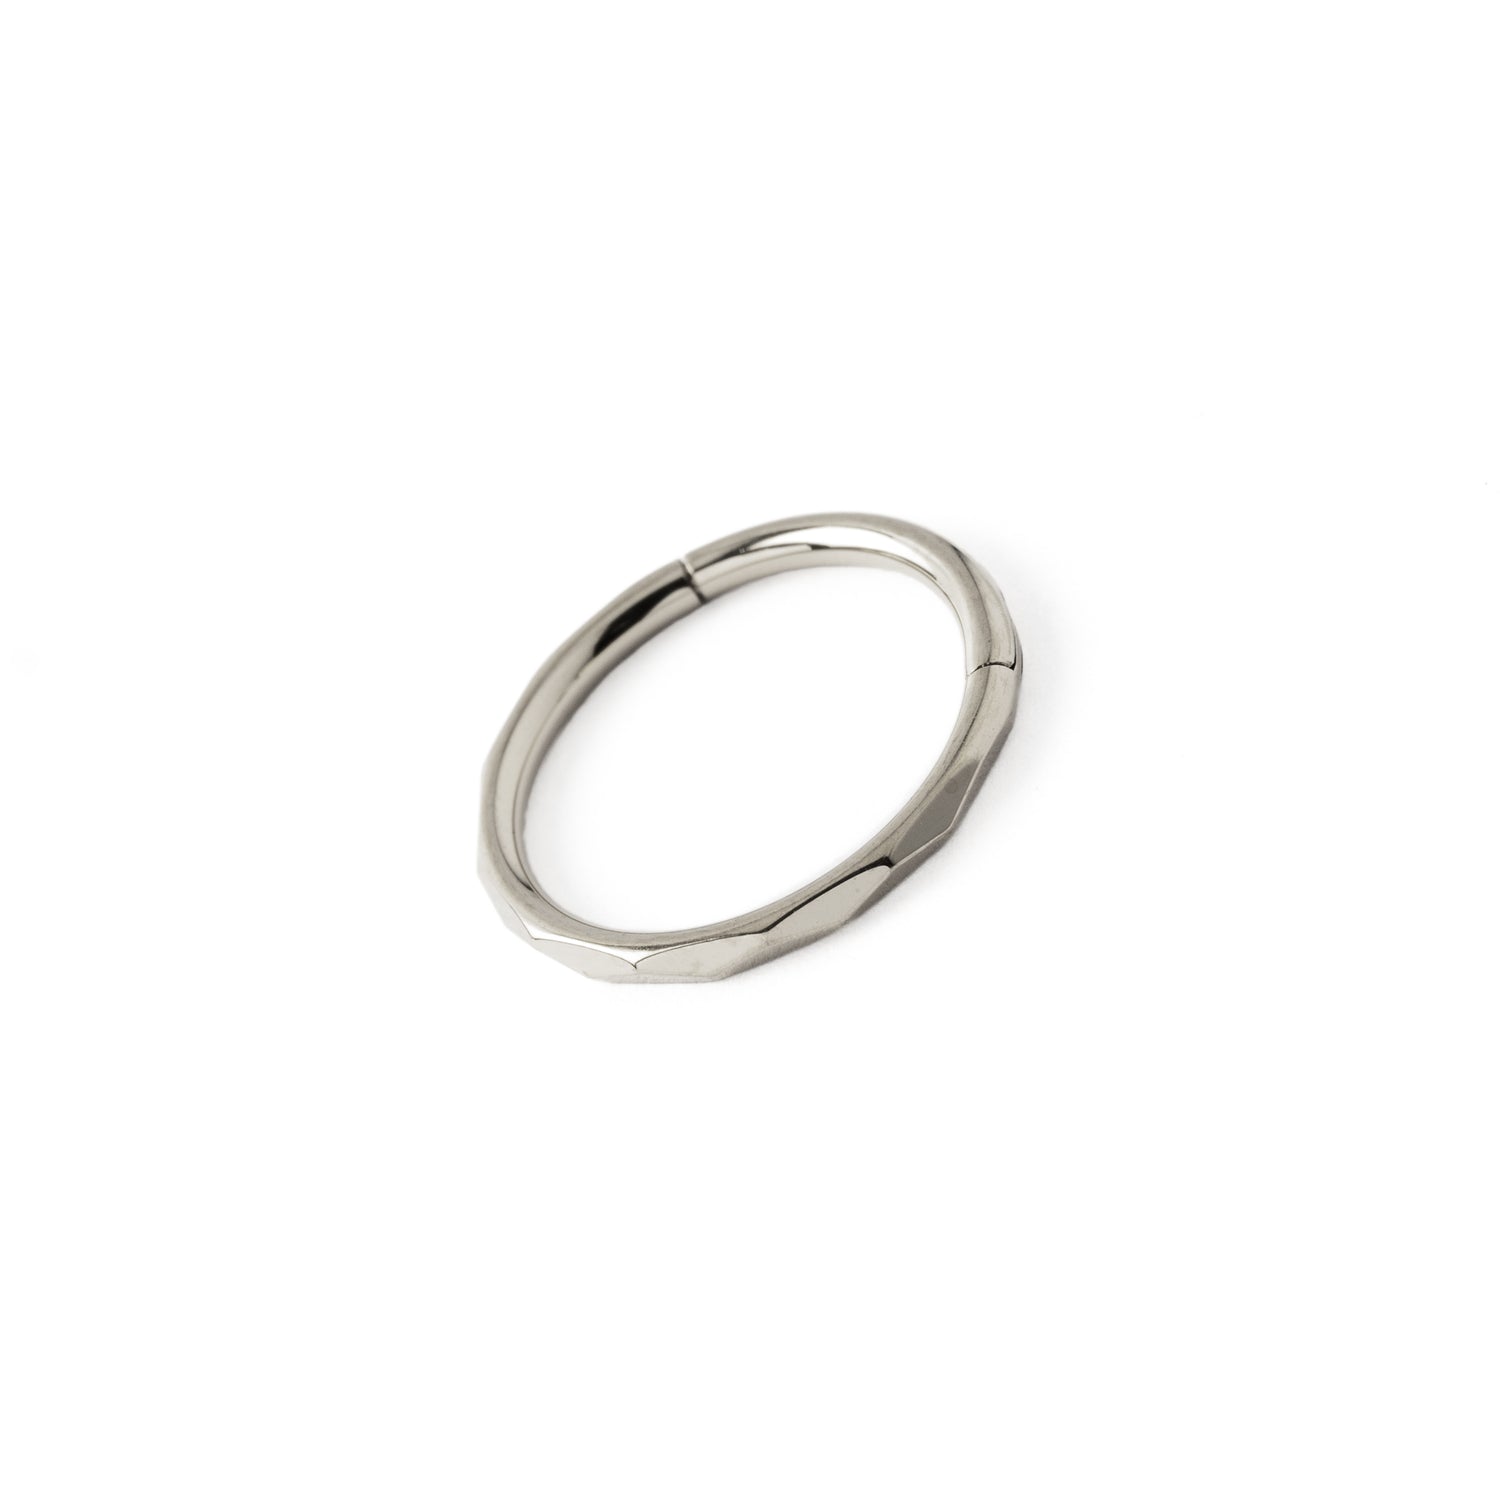 Faceted surgical steel Clicker Ring right side view